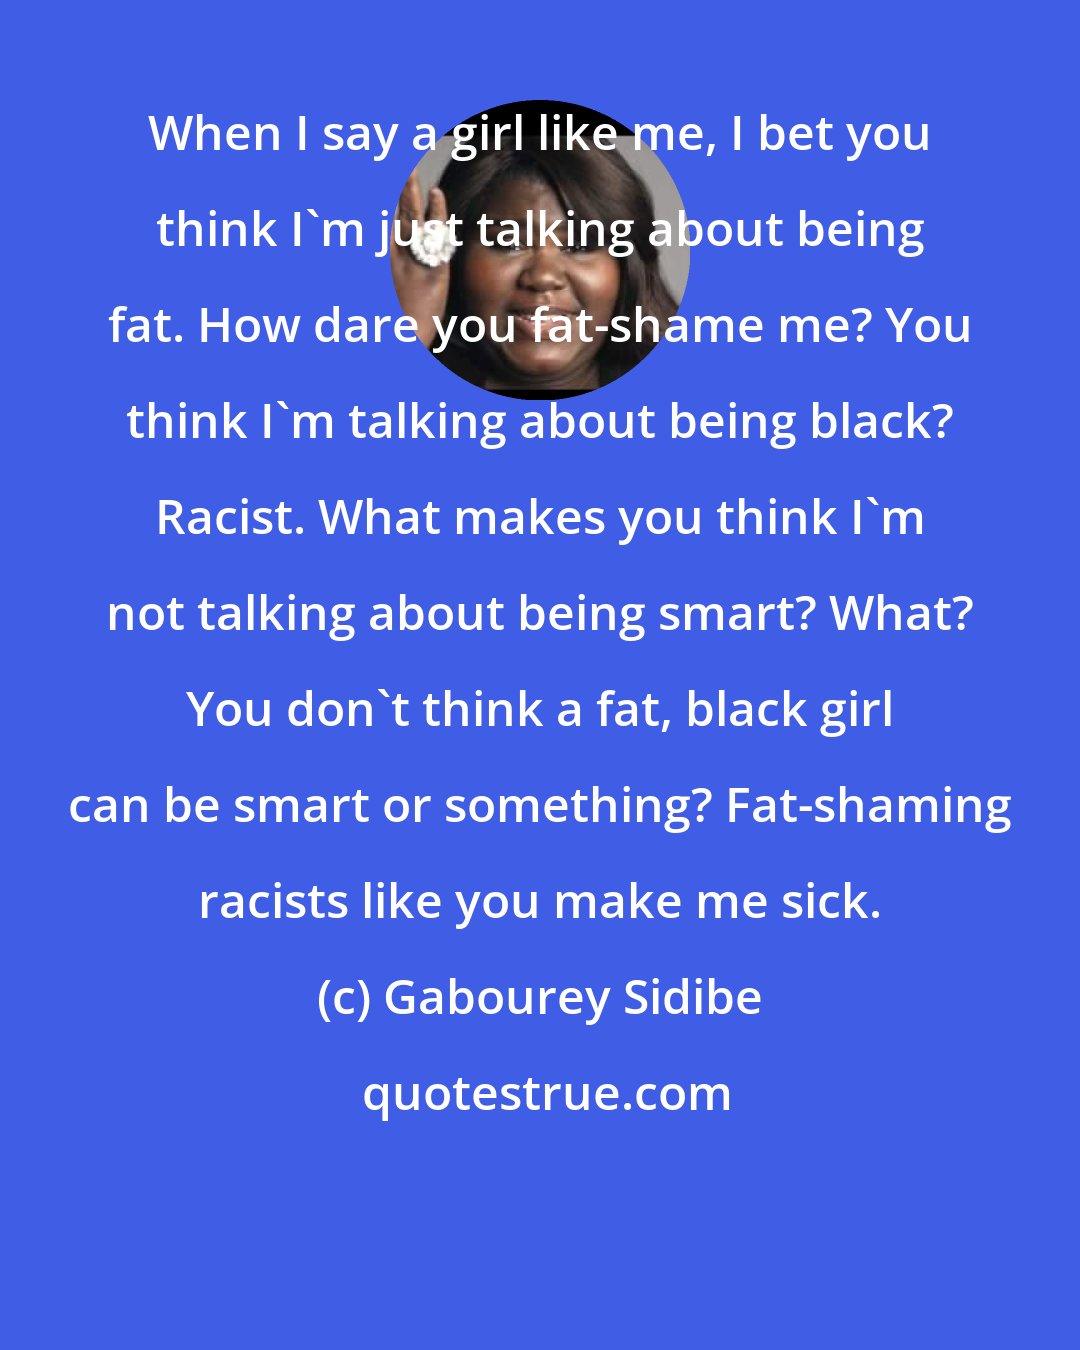 Gabourey Sidibe: When I say a girl like me, I bet you think I'm just talking about being fat. How dare you fat-shame me? You think I'm talking about being black? Racist. What makes you think I'm not talking about being smart? What? You don't think a fat, black girl can be smart or something? Fat-shaming racists like you make me sick.